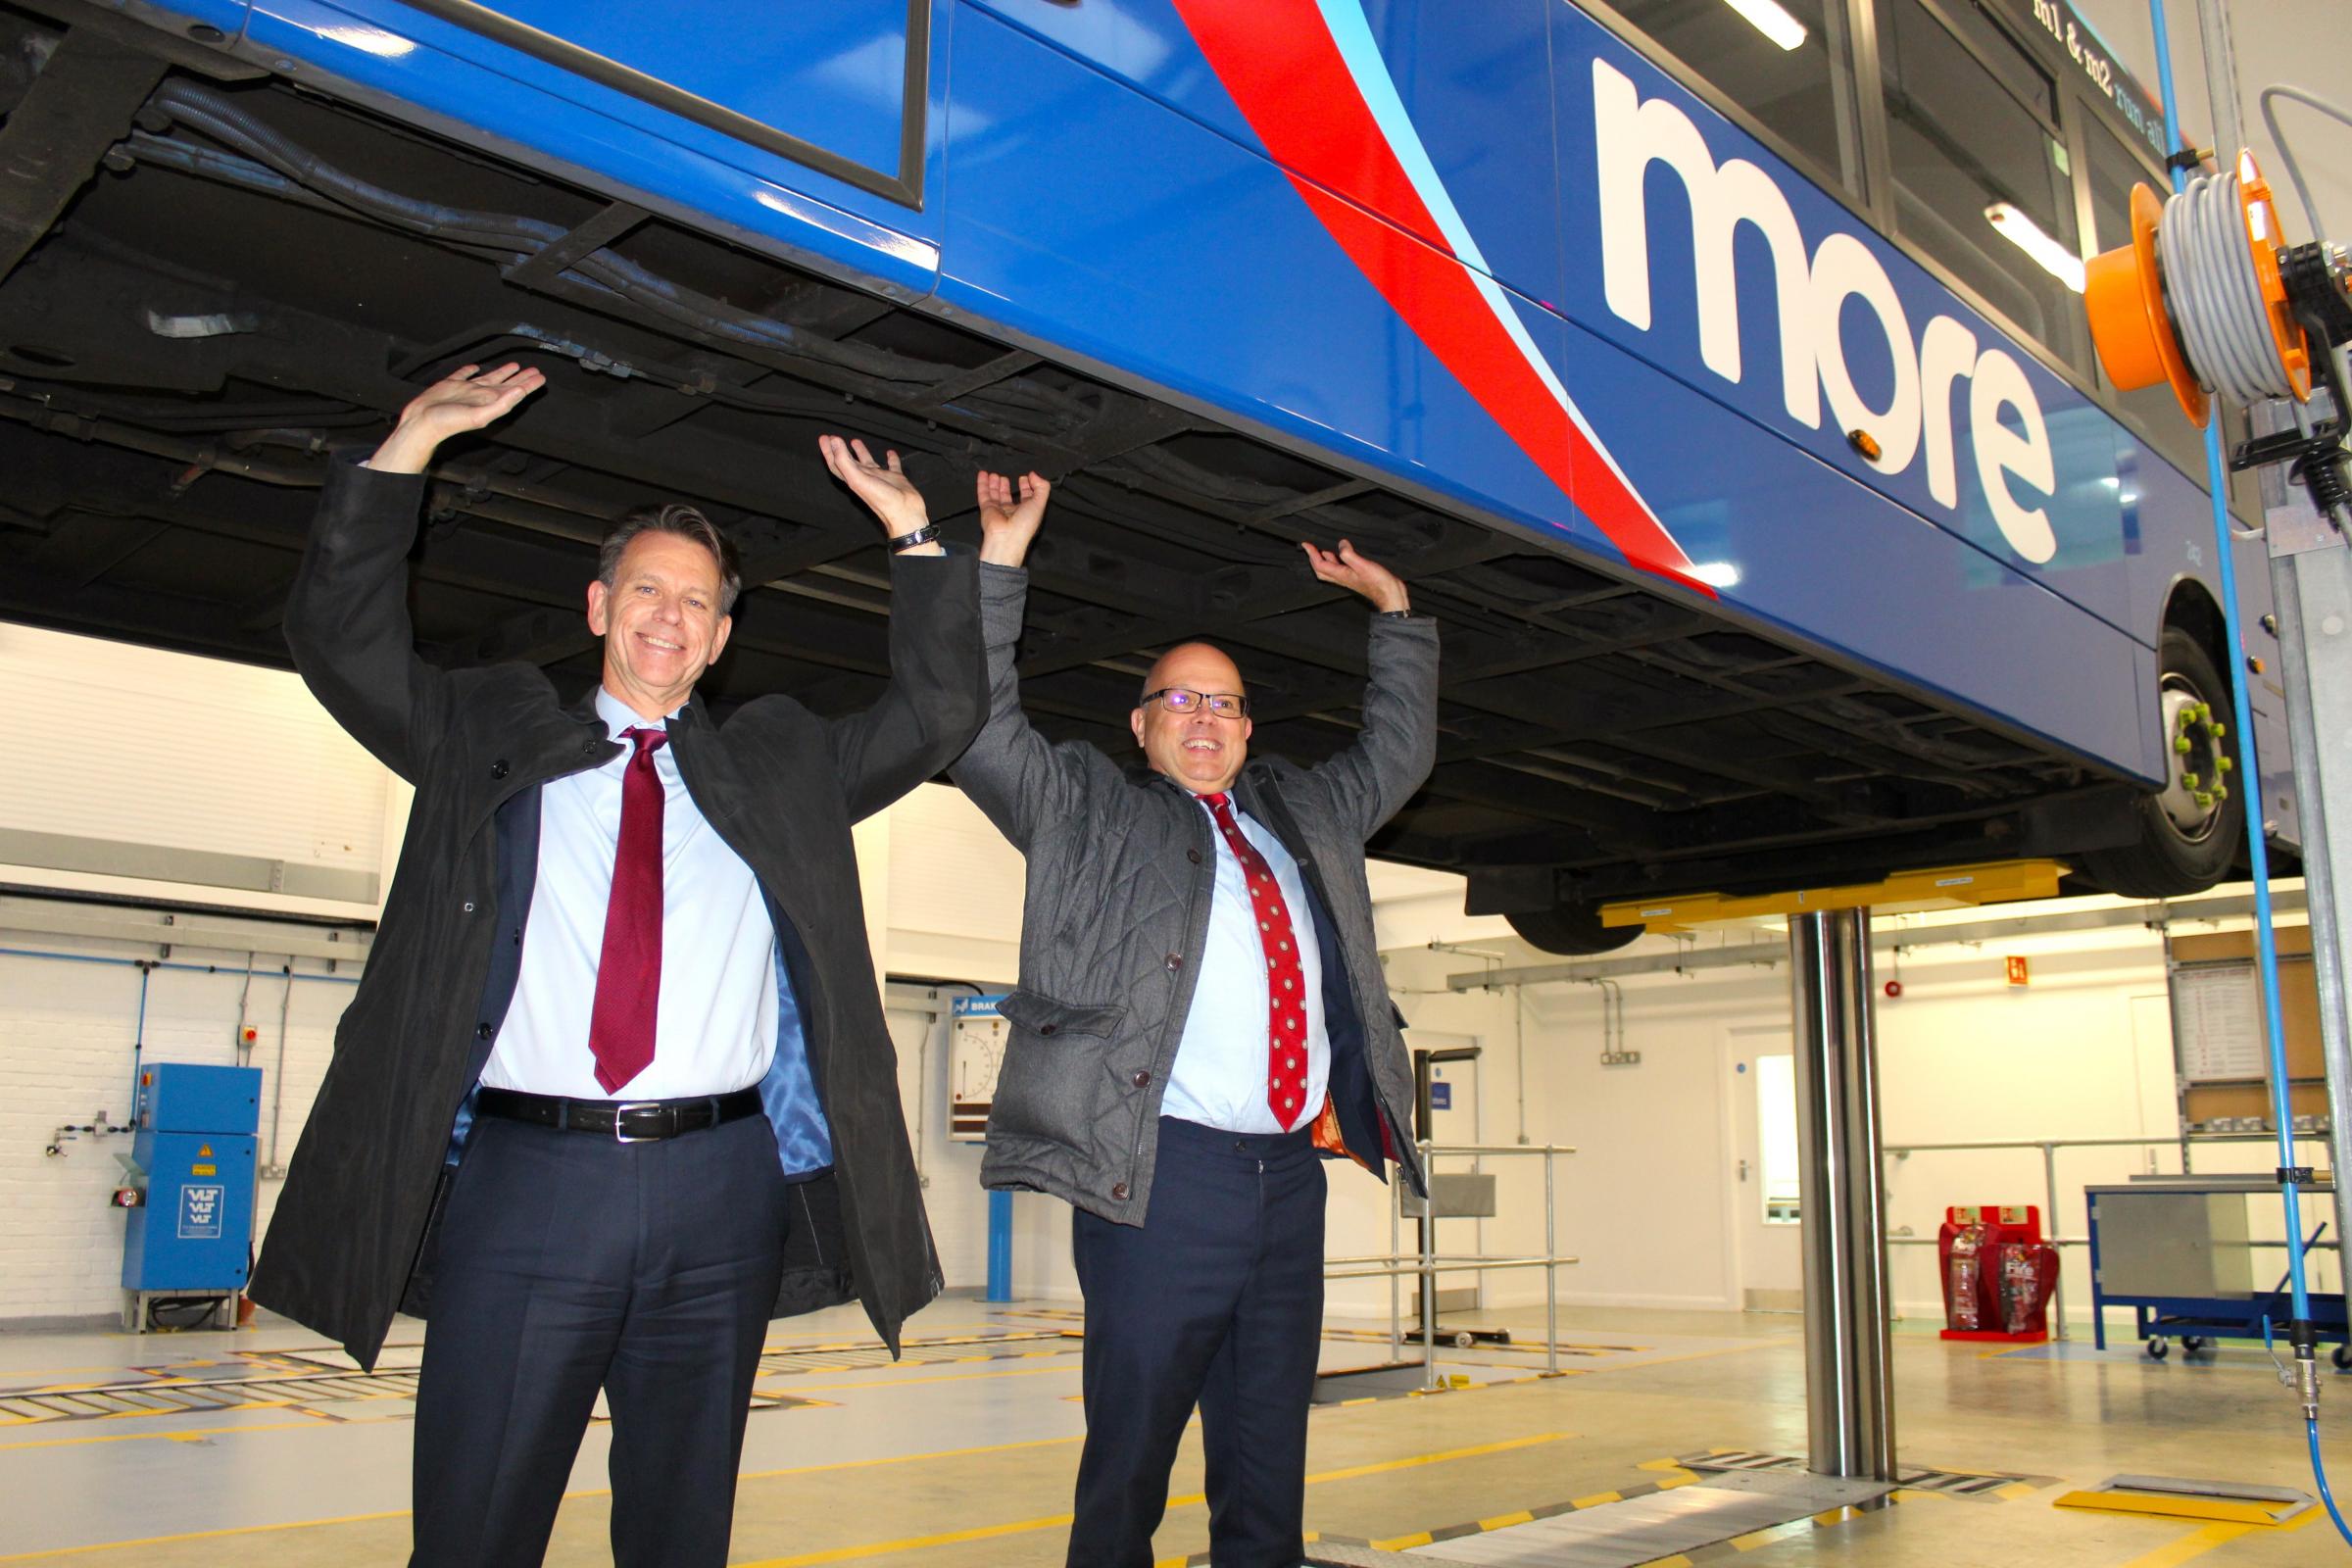 Morebus opens £2.5m depot in Bournemouth - Bournemouth Echo